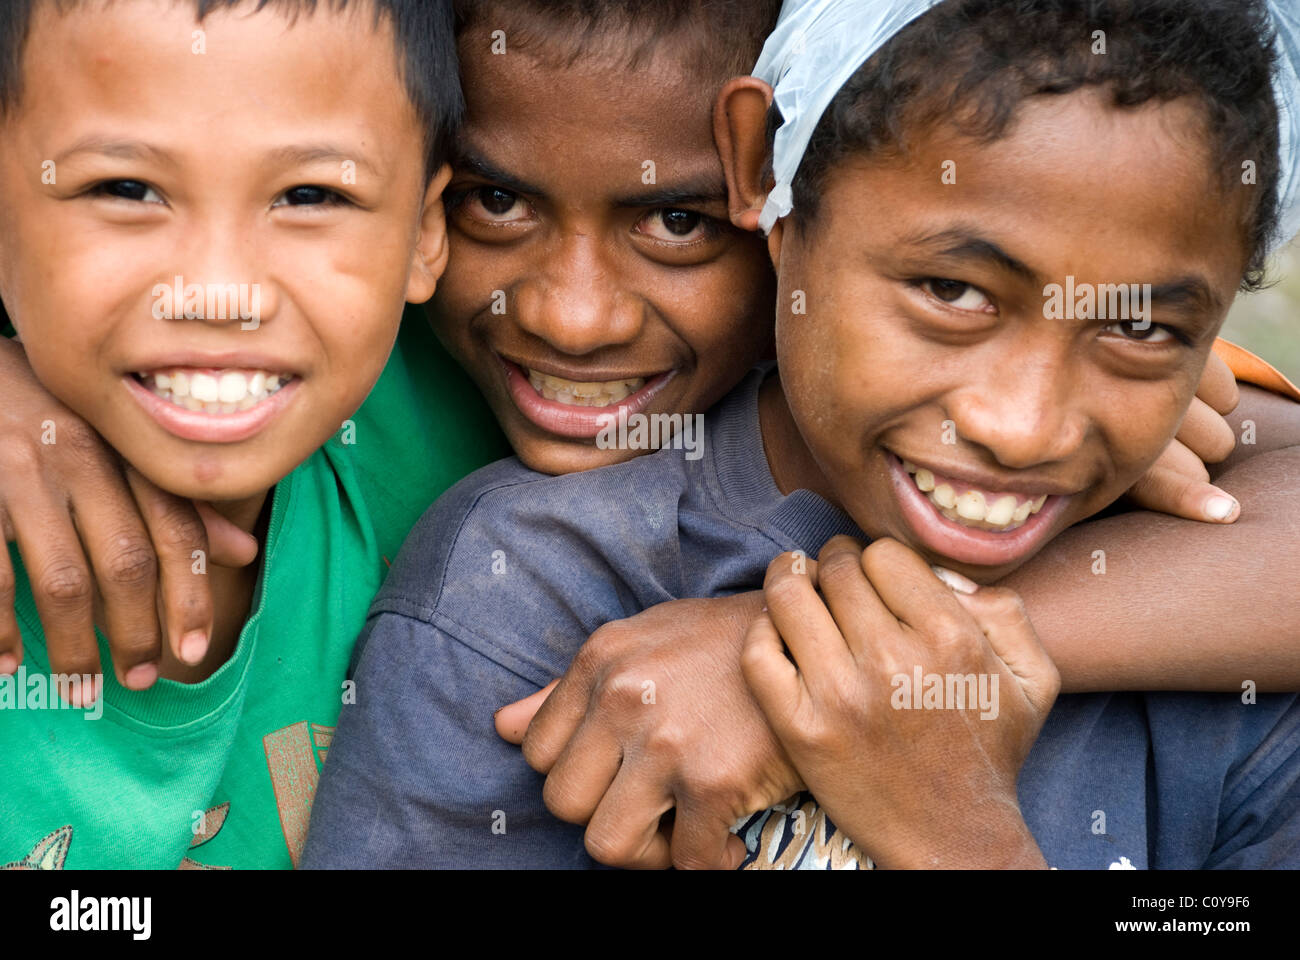 boys in kupang, west timor, indonesia Stock Photo